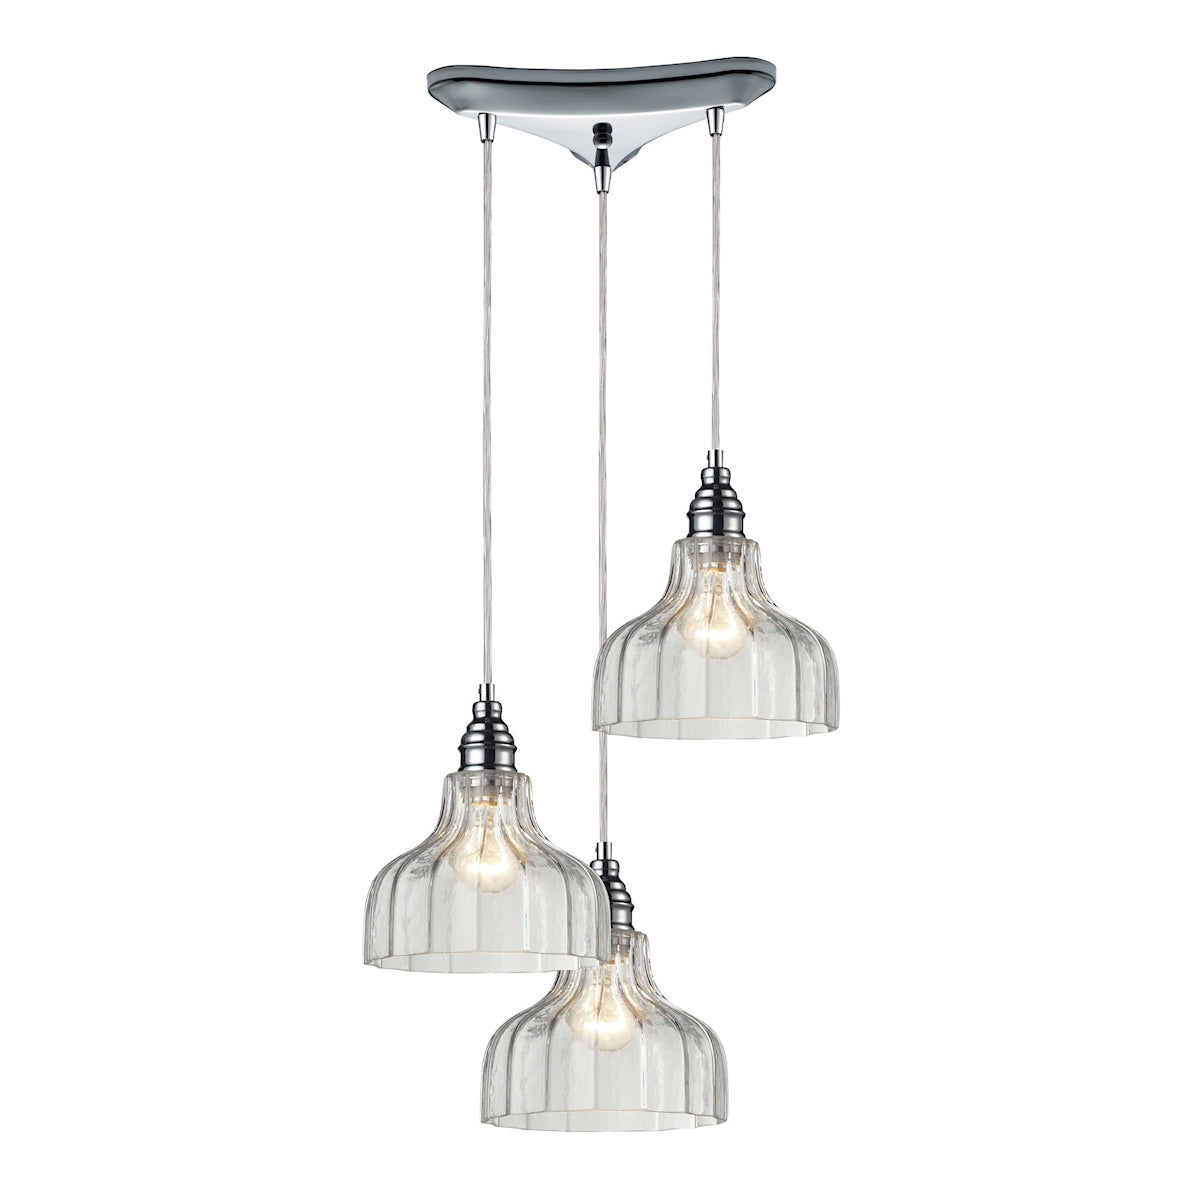 ELK Lighting 46018/3 Danica 3-Light Triangular Pendant Fixture in Polished Chrome with Clear Glass